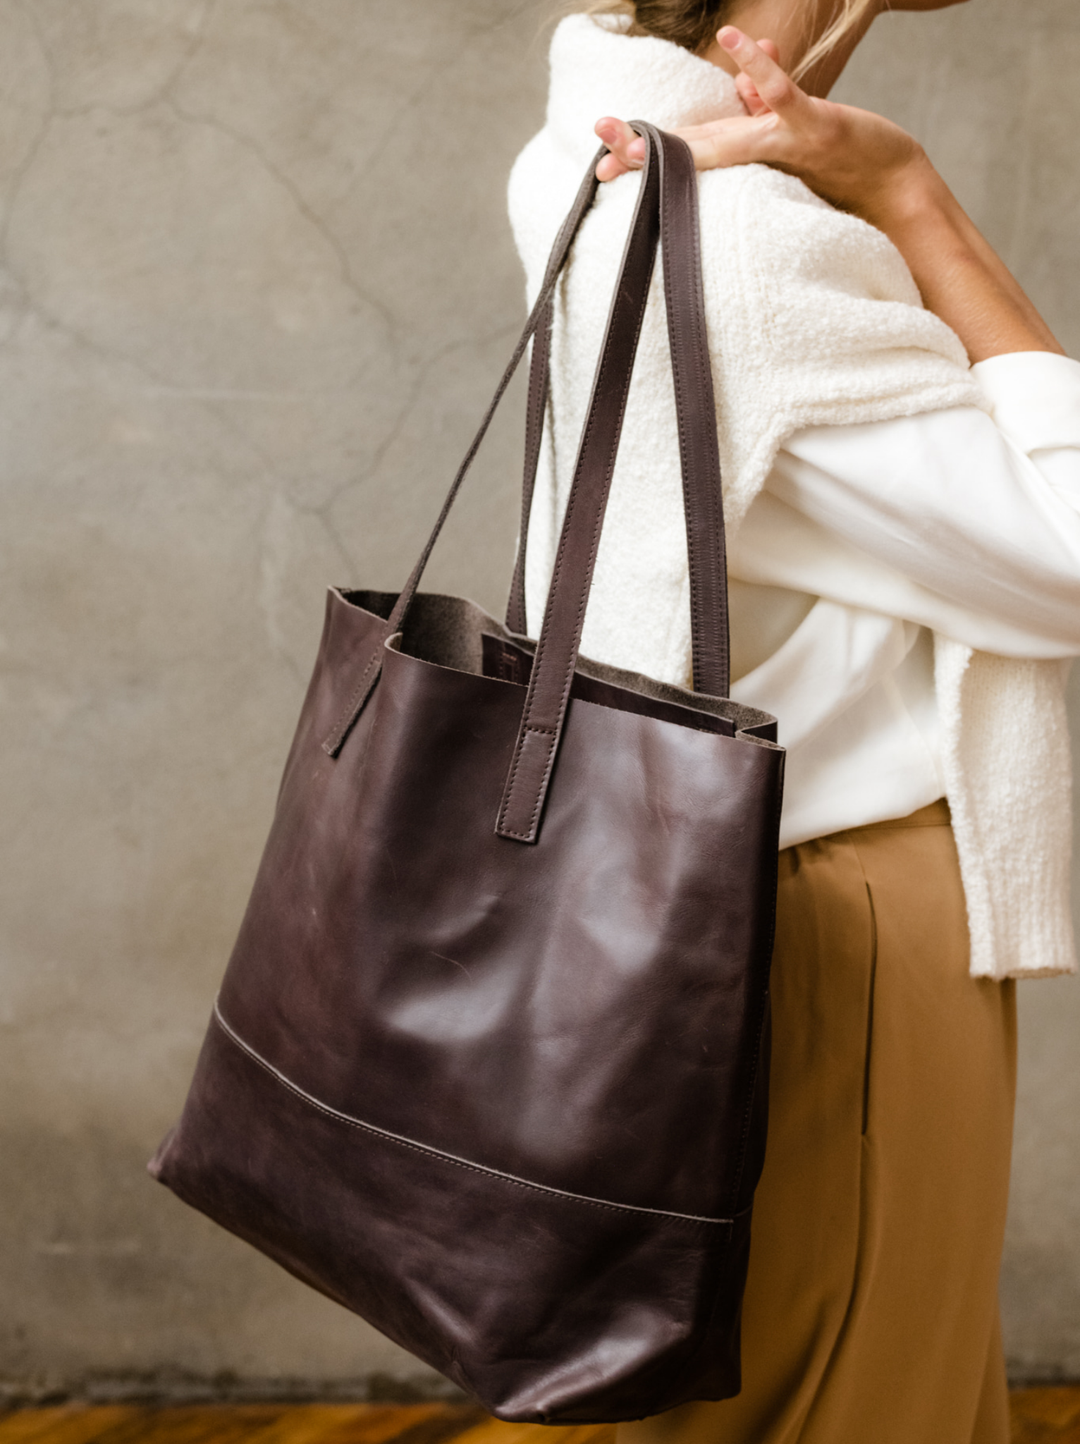 This Oprah-approved vegan leather tote is super chic and under $100